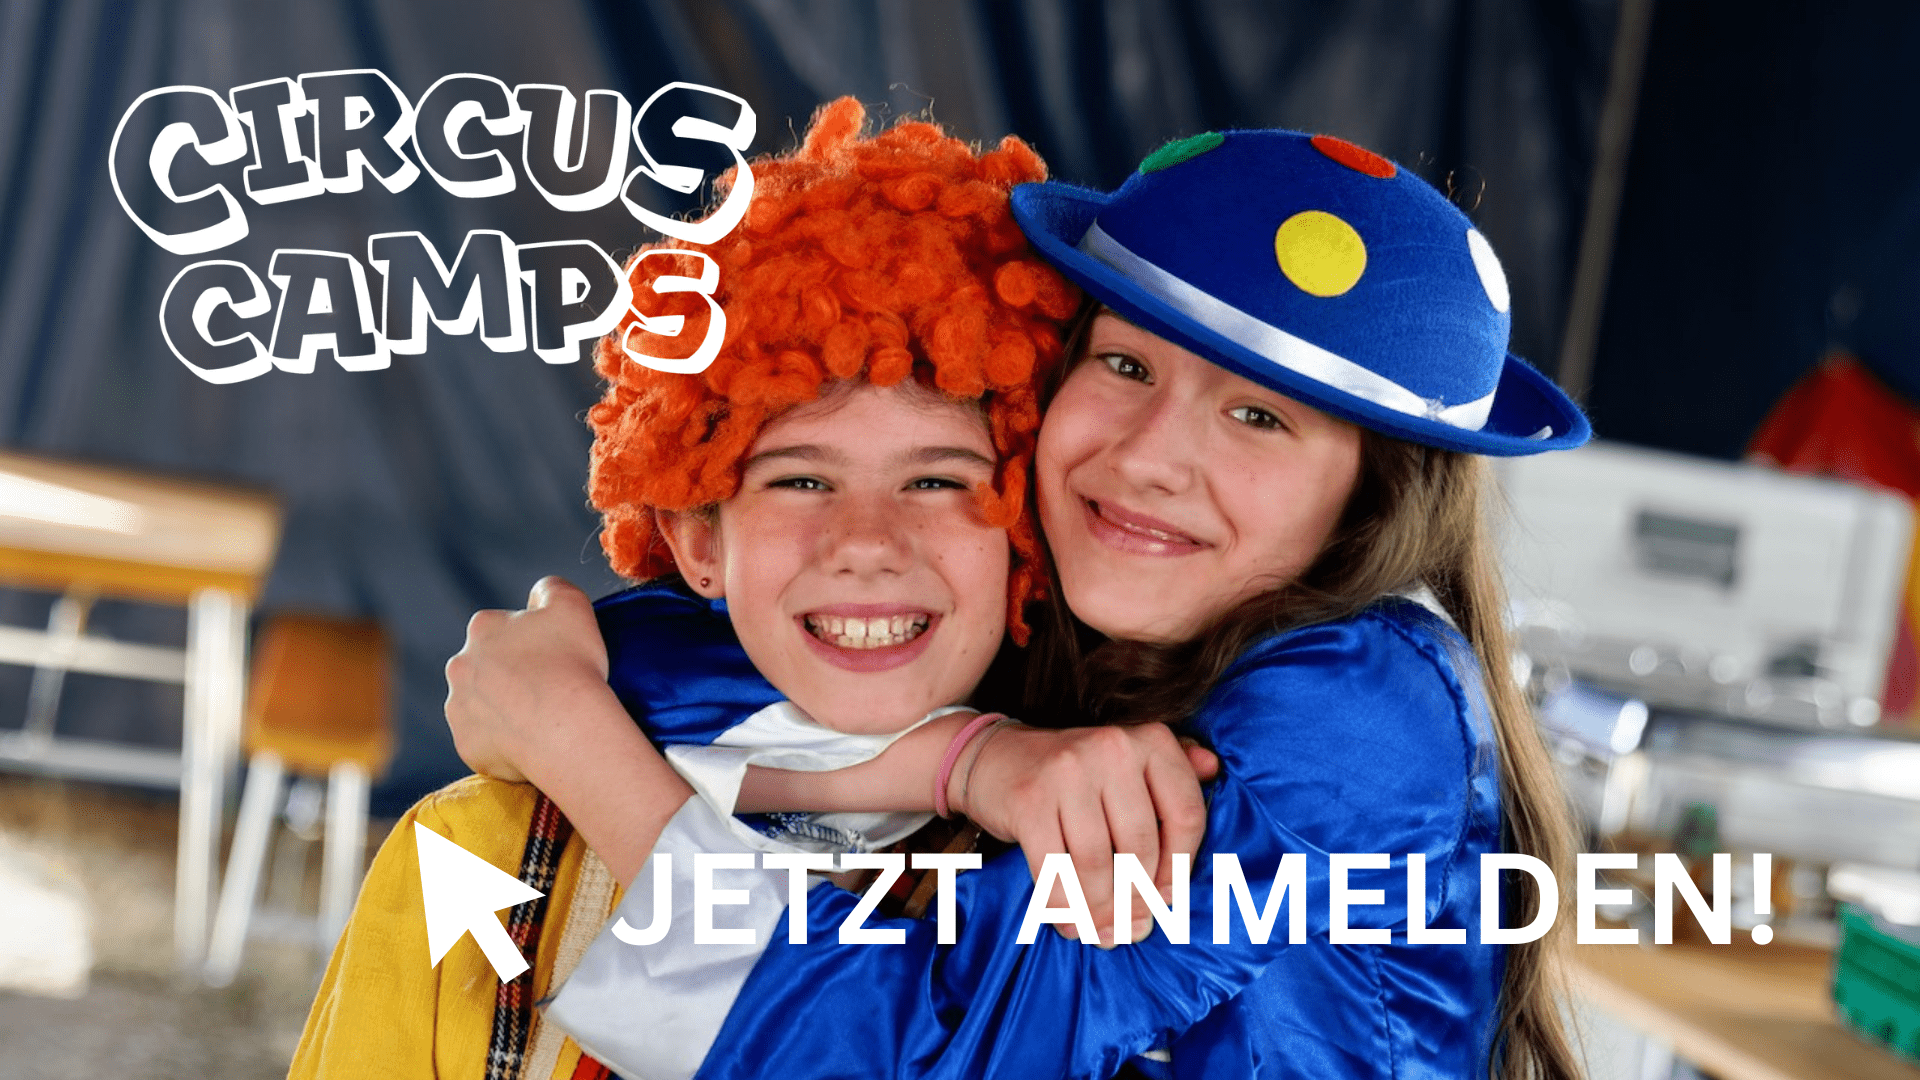 YIPPIHHH! THE YOUNG STAGE CIRCUS CAMPS ARE BACK!